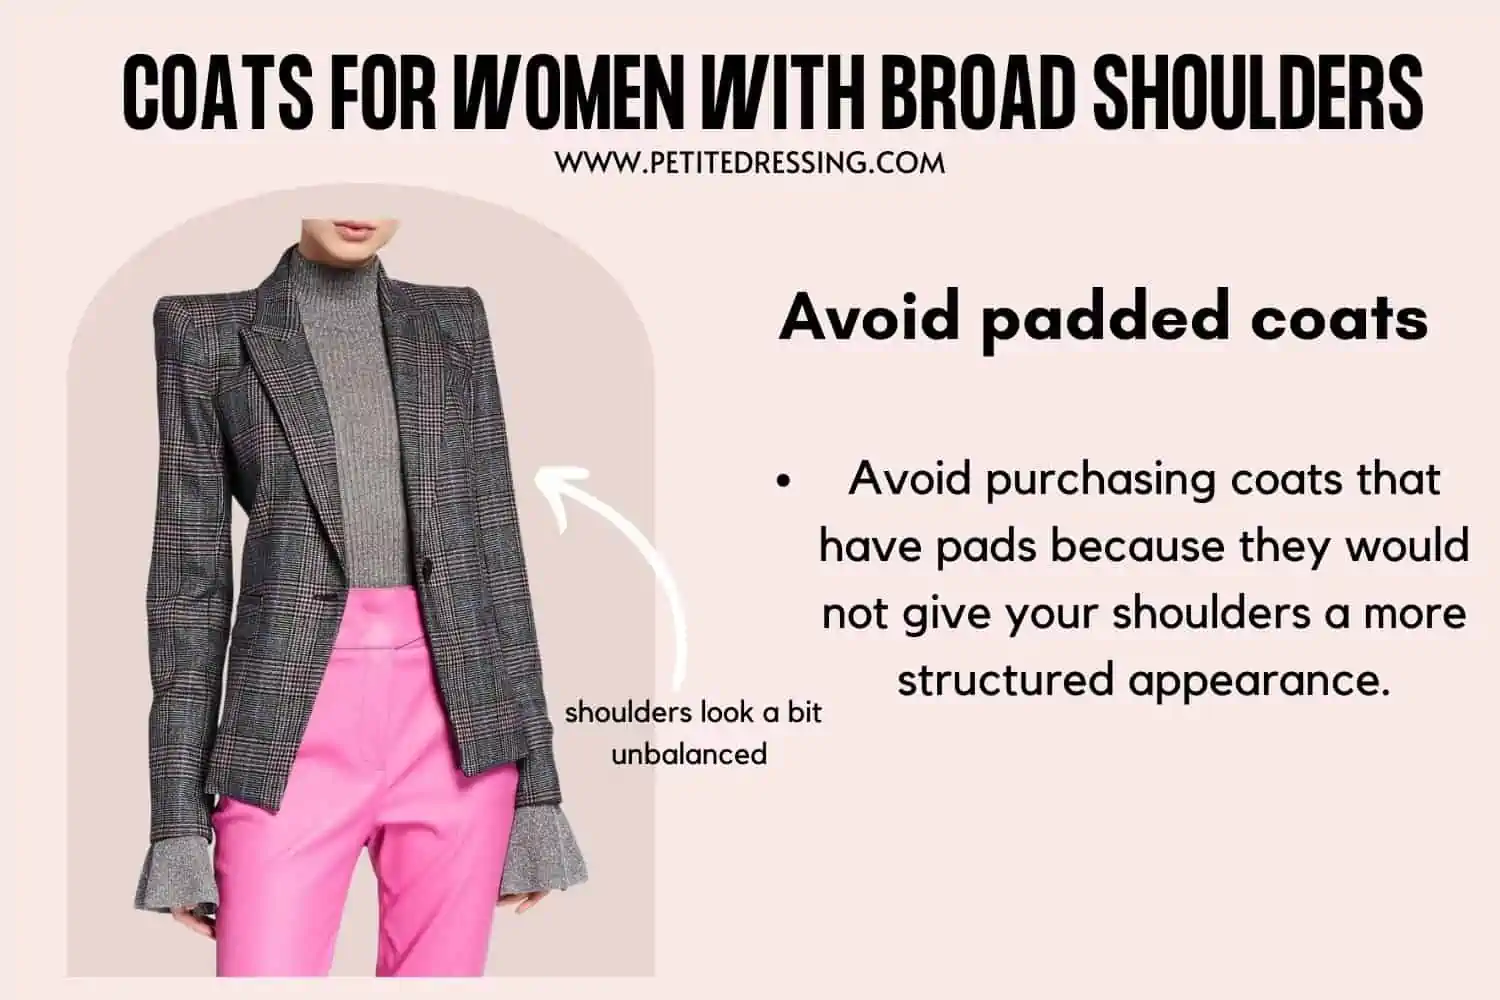 The Complete Coat Guide for Women with Broad Shoulders - Petite Dressing